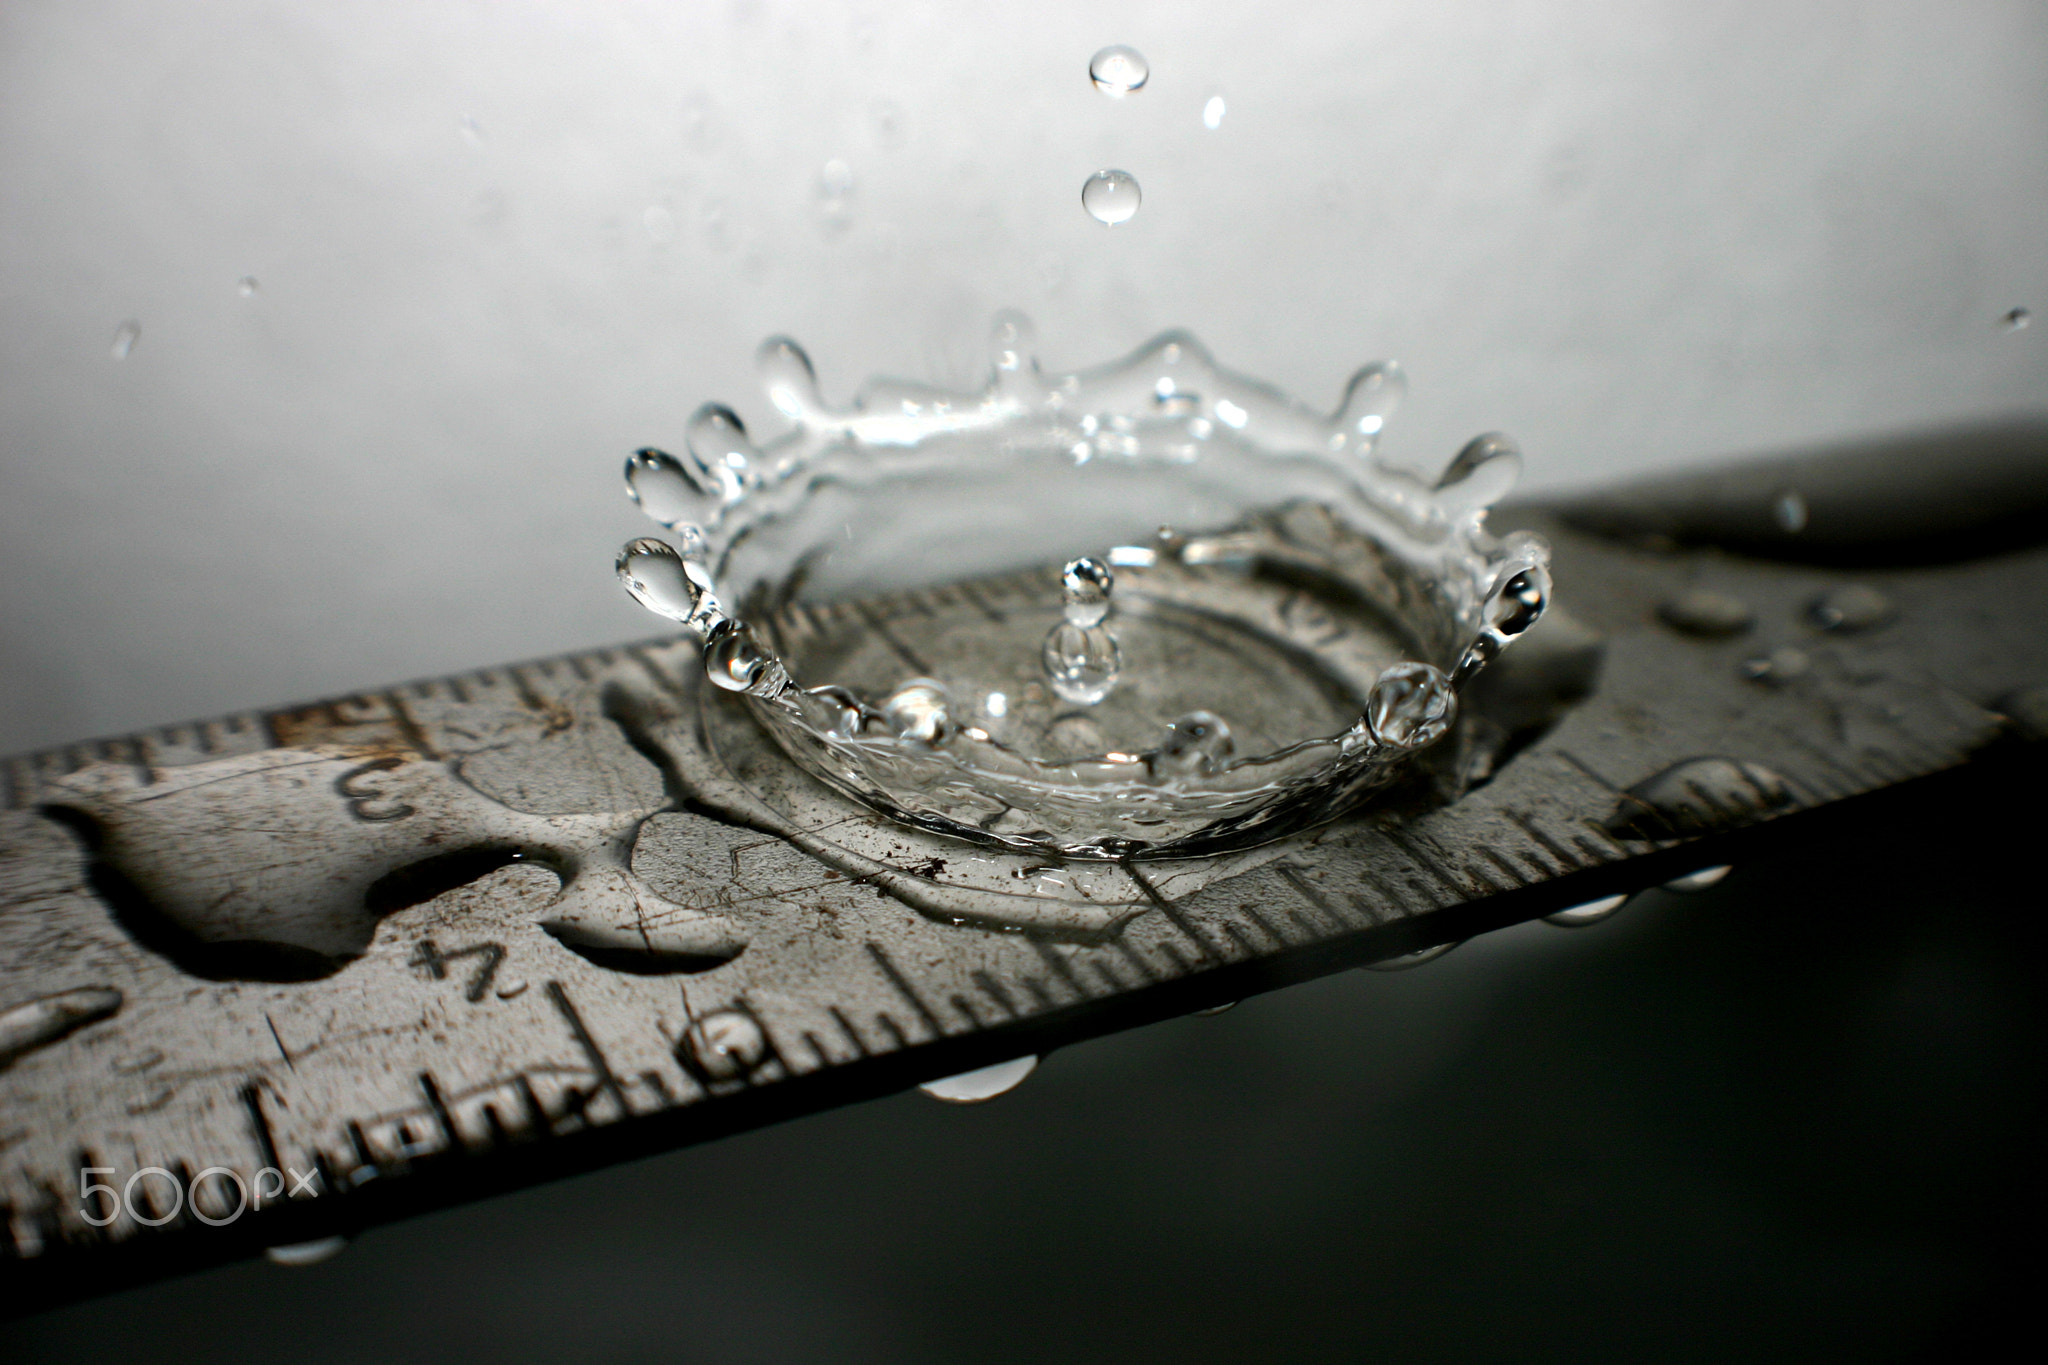 Water splashes on a silver ruler